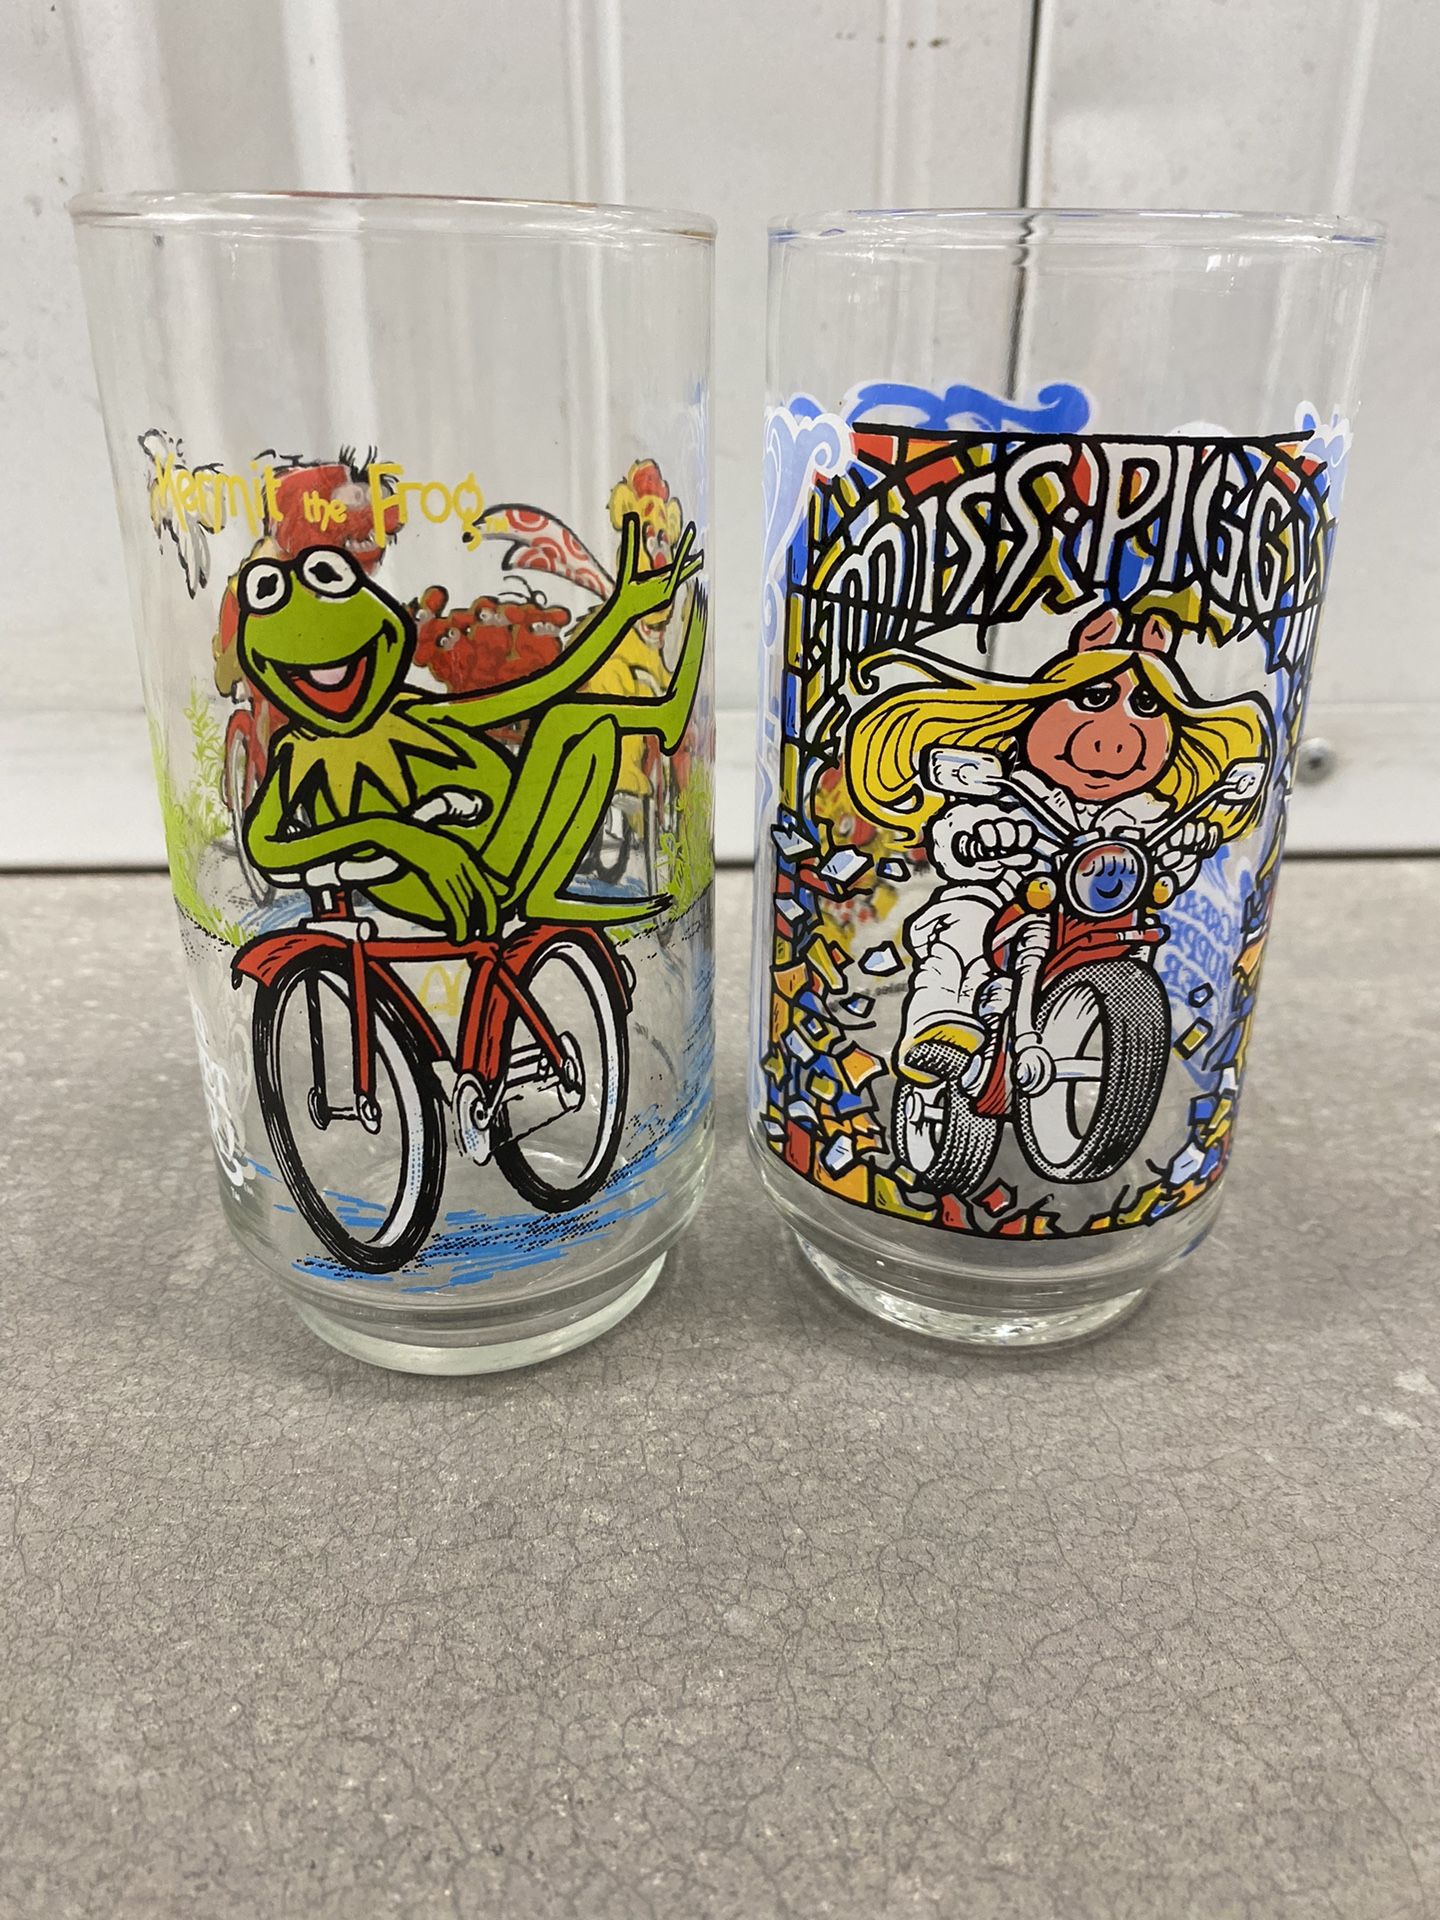 Vintage 1981 McDonald’s Glass Cups- The Great Muppet Caper Collectors